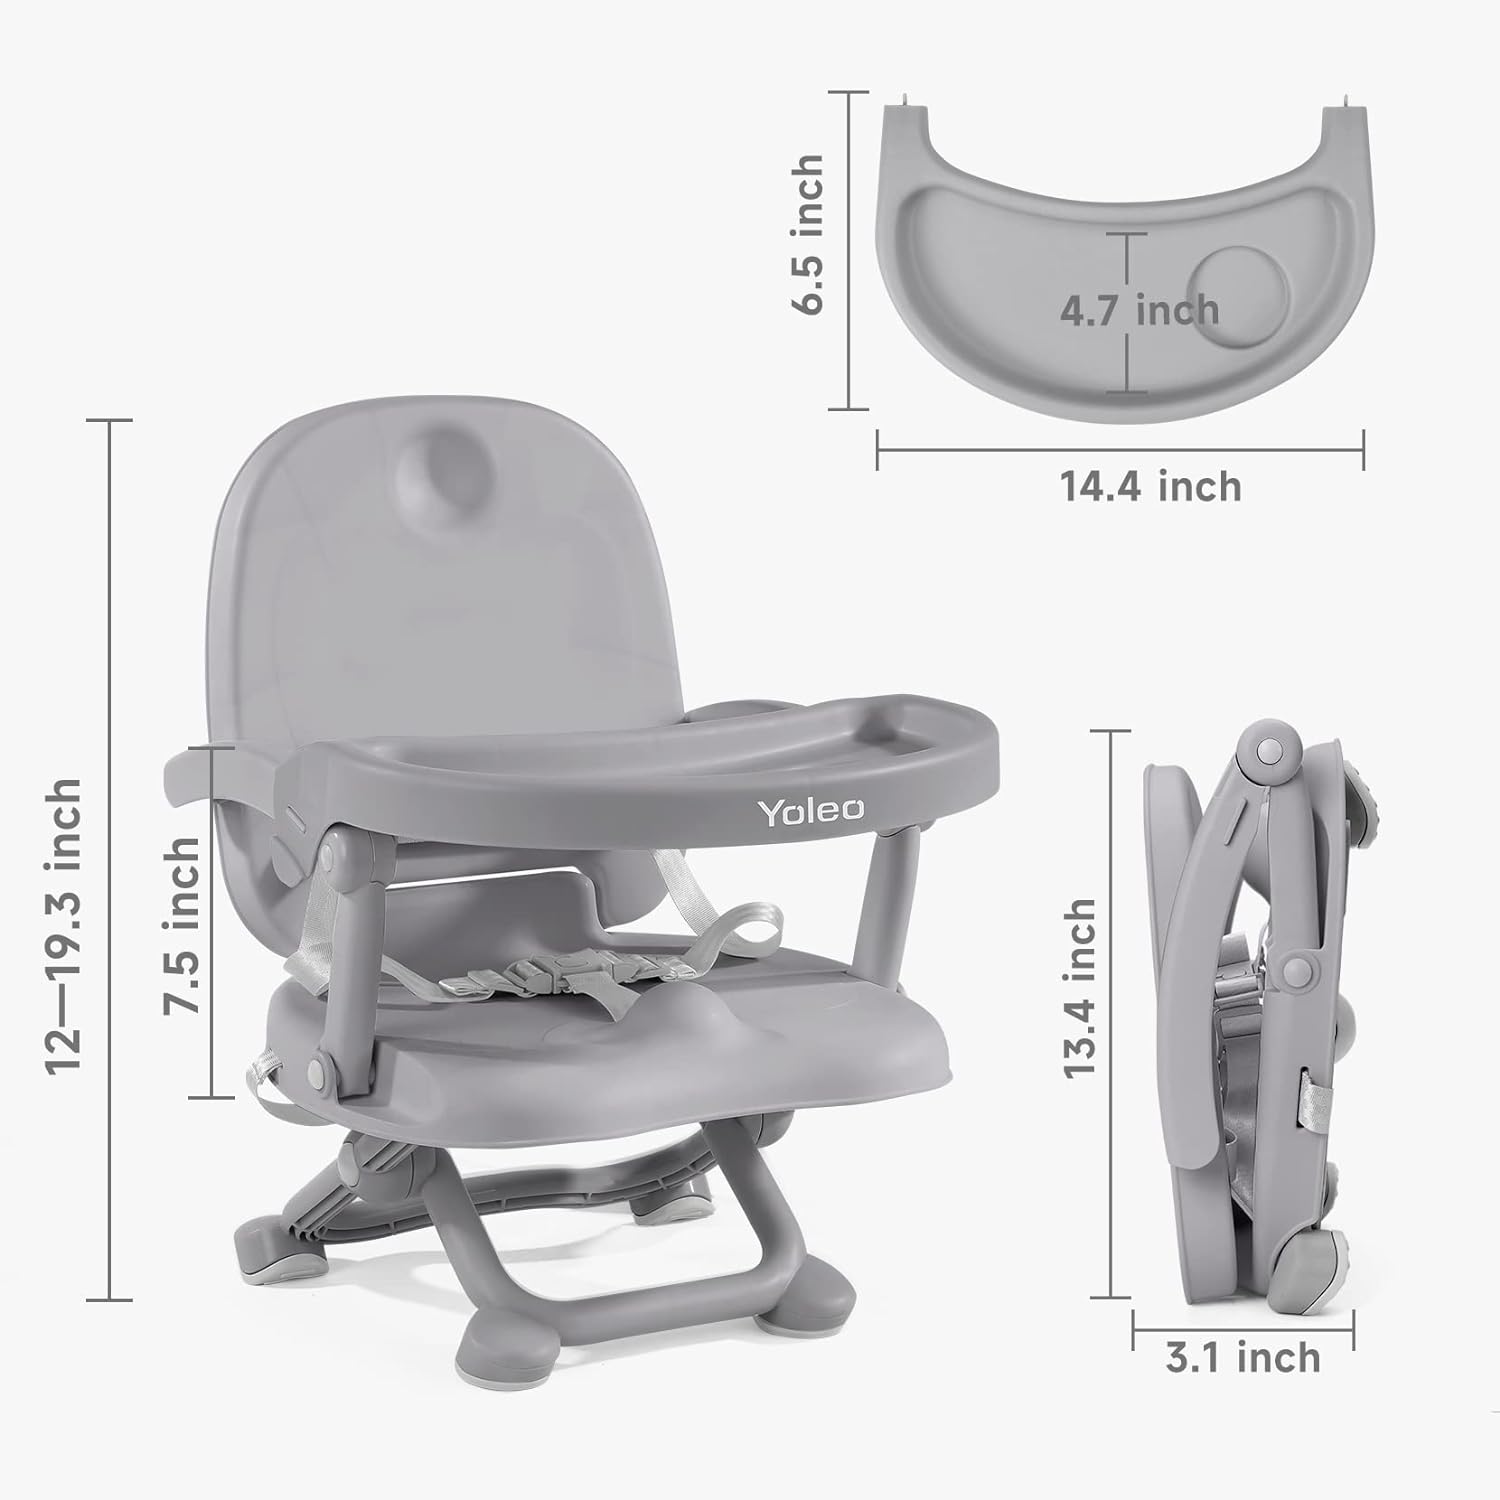 https://bigbigmart.com/wp-content/uploads/2023/10/YOLEO-Baby-High-Chair-Booster-Seat-for-Dining-Table-Adjustable-Height-Travel-Booster-Seat-with-Tray-Toddler-Booster-Seat-Easy-Clean-No-Cushion-Grey3.jpg